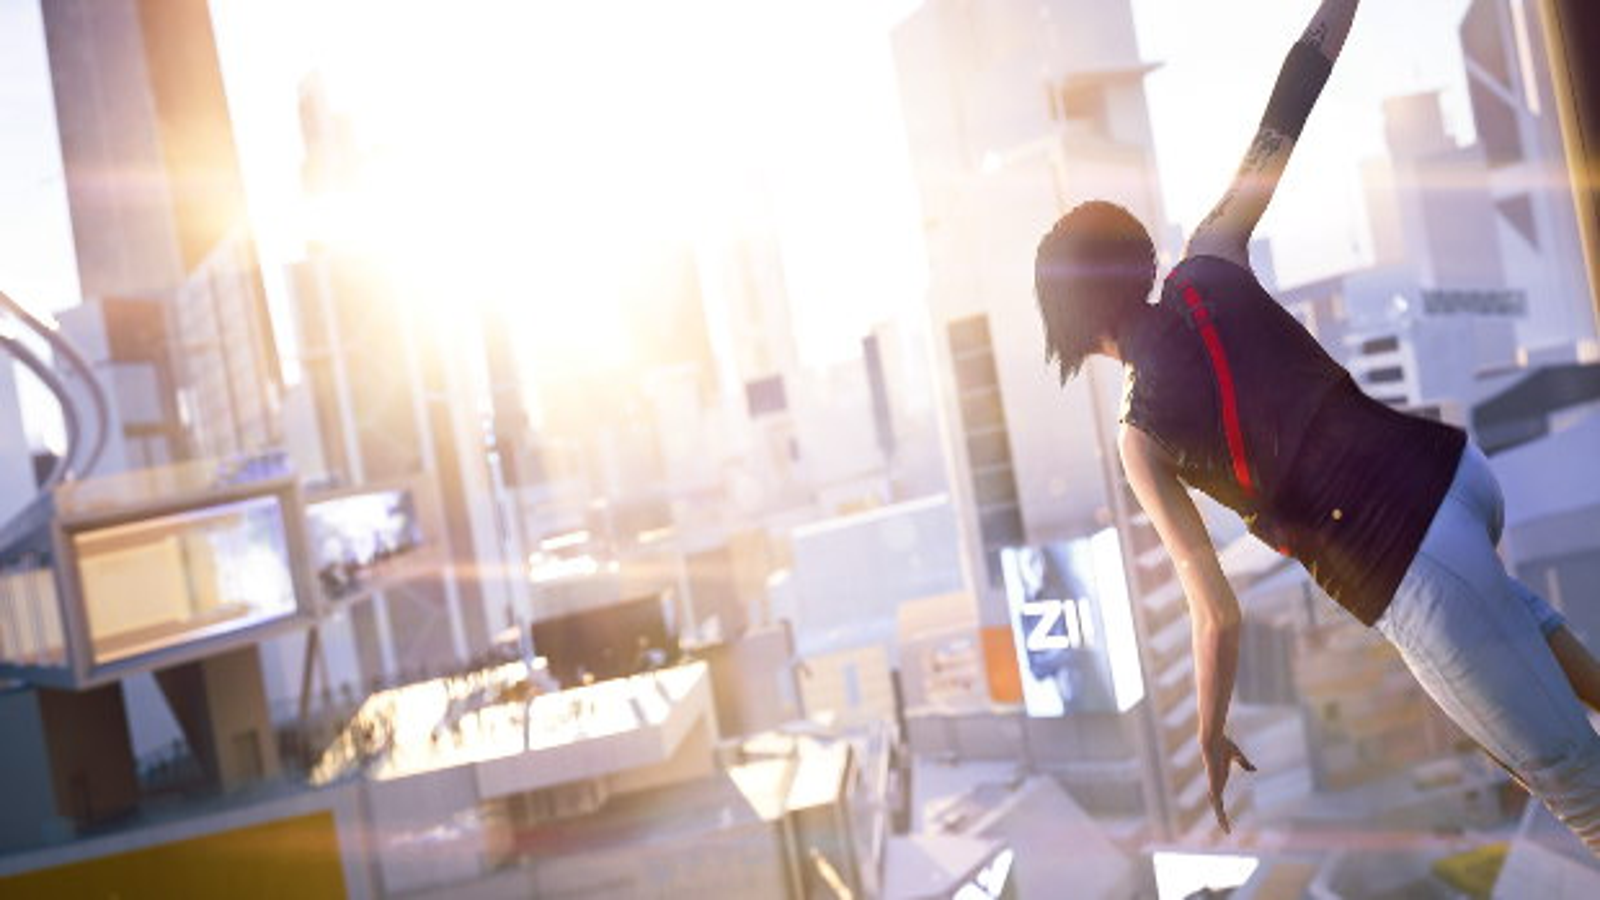 Mirror's Edge: Catalyst's open world excites -- but its story is